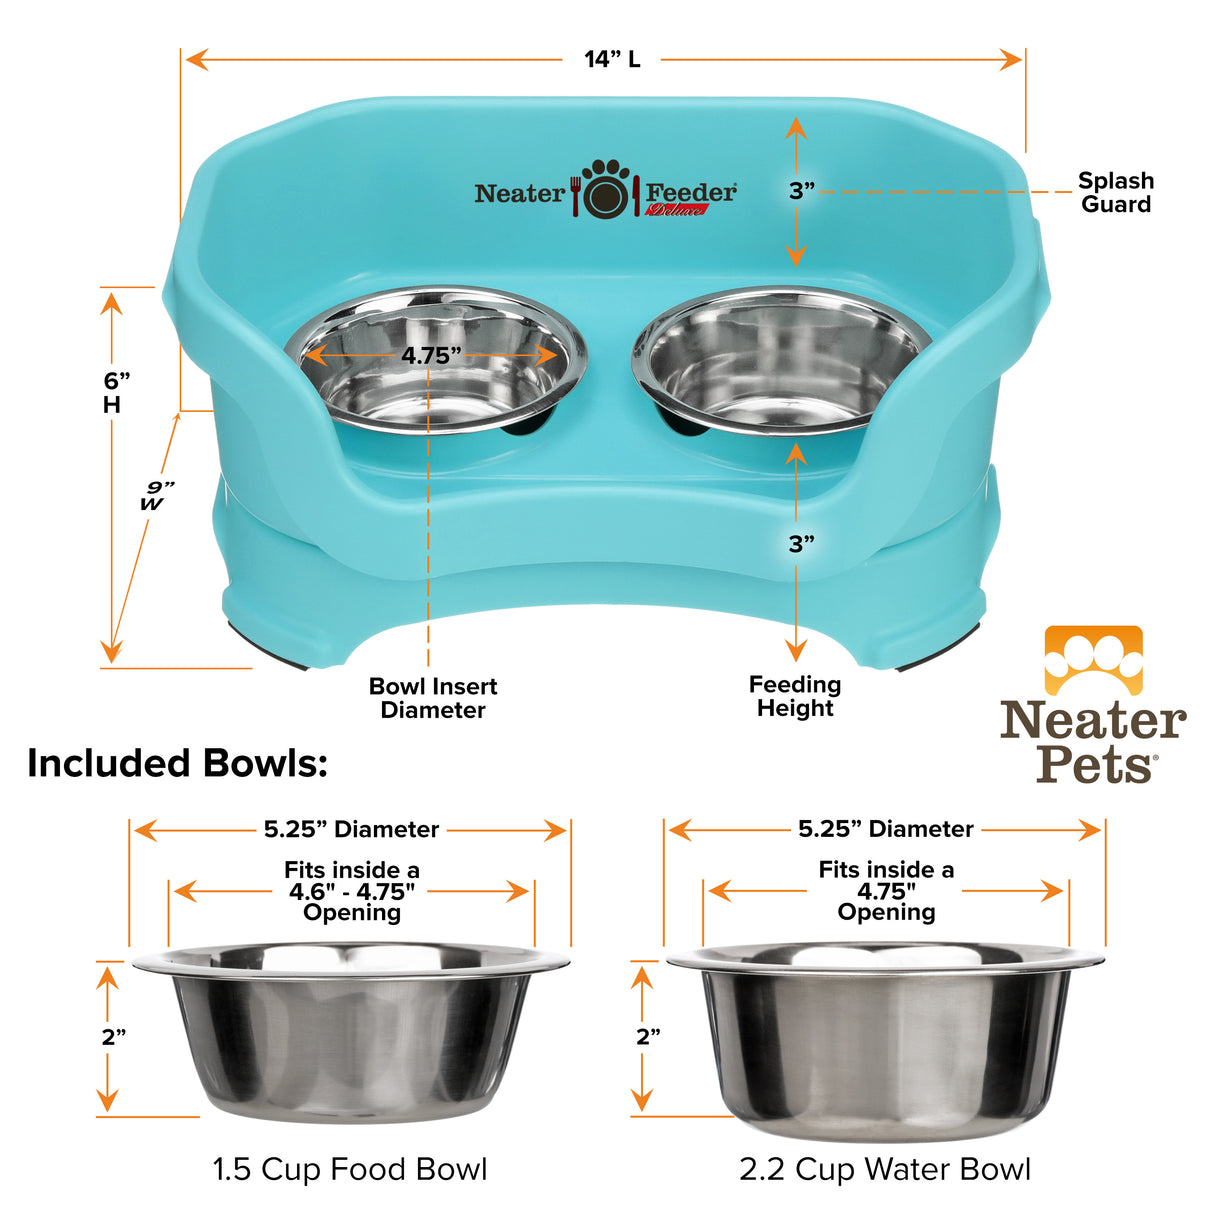 Deluxe Aqua Small Dog Neater Feeder and Bowl dimensions